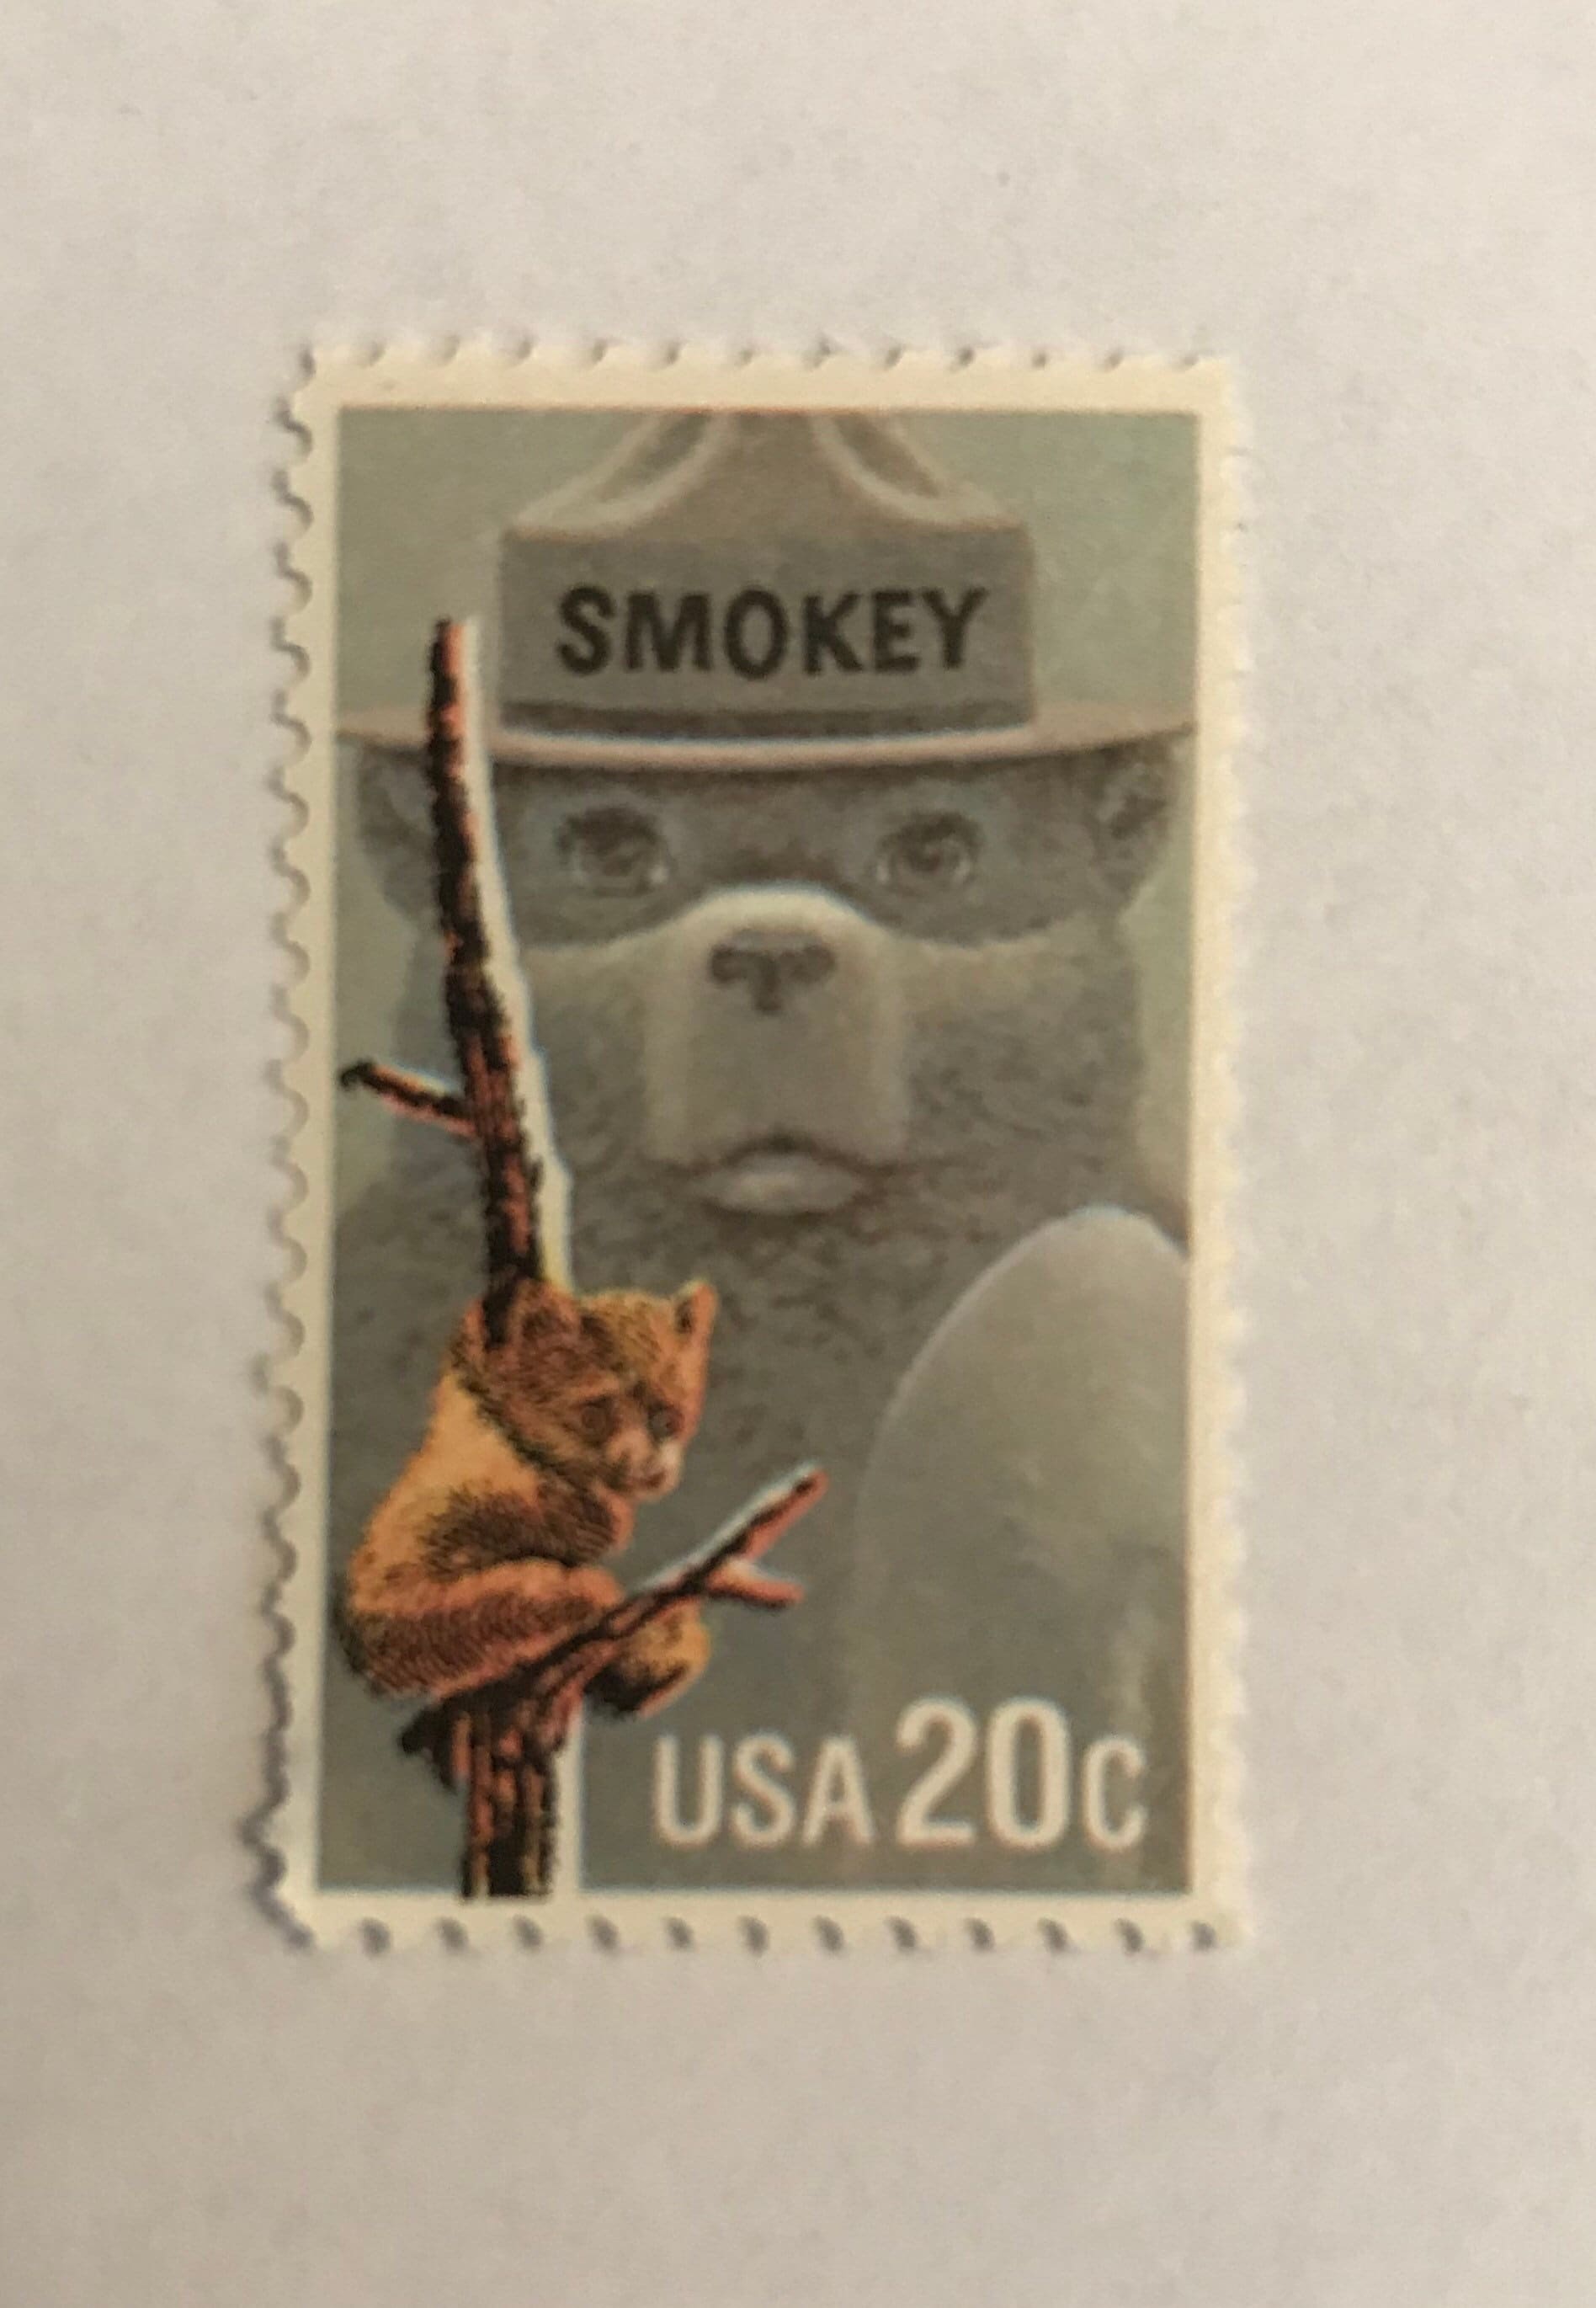 10 Smokey Bear 20c Vintage (Issued in 1984) Unused U.S. Postage Stamps for  Mailing - Collecting - Crafts - Scott Catalog 2096